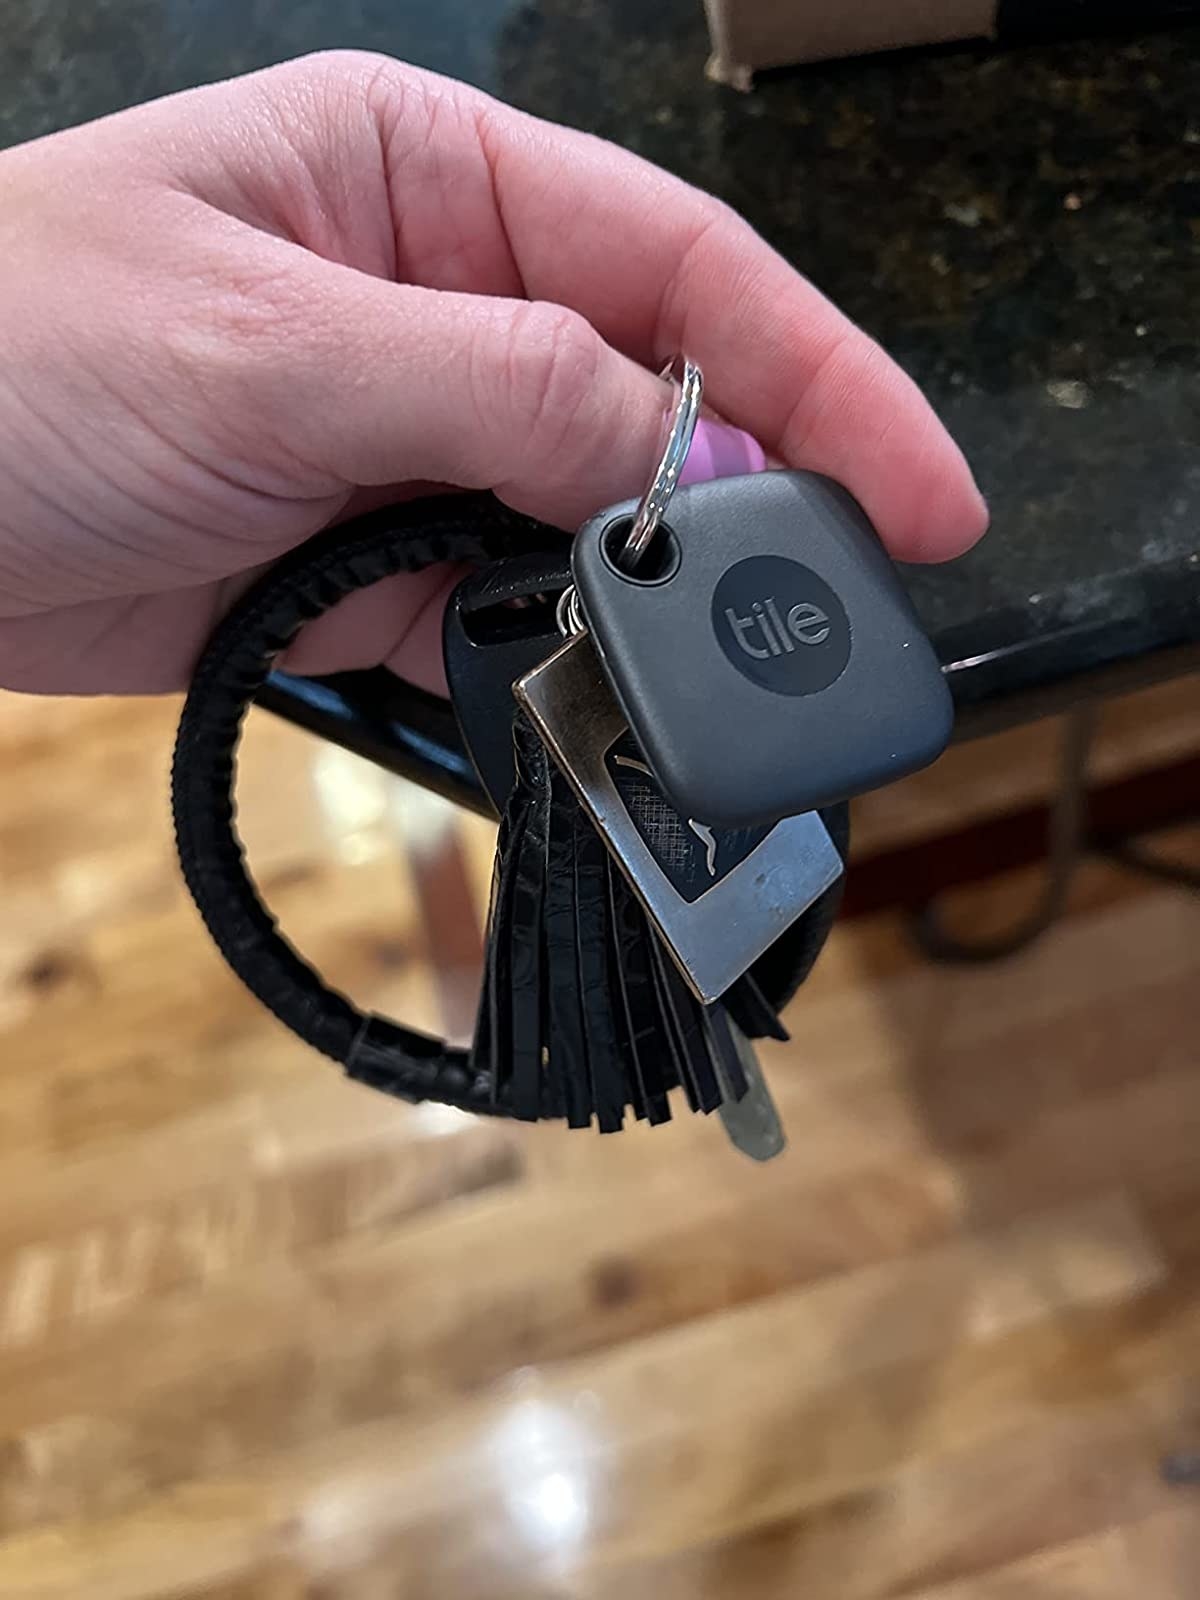 the black square tracker on a keychain